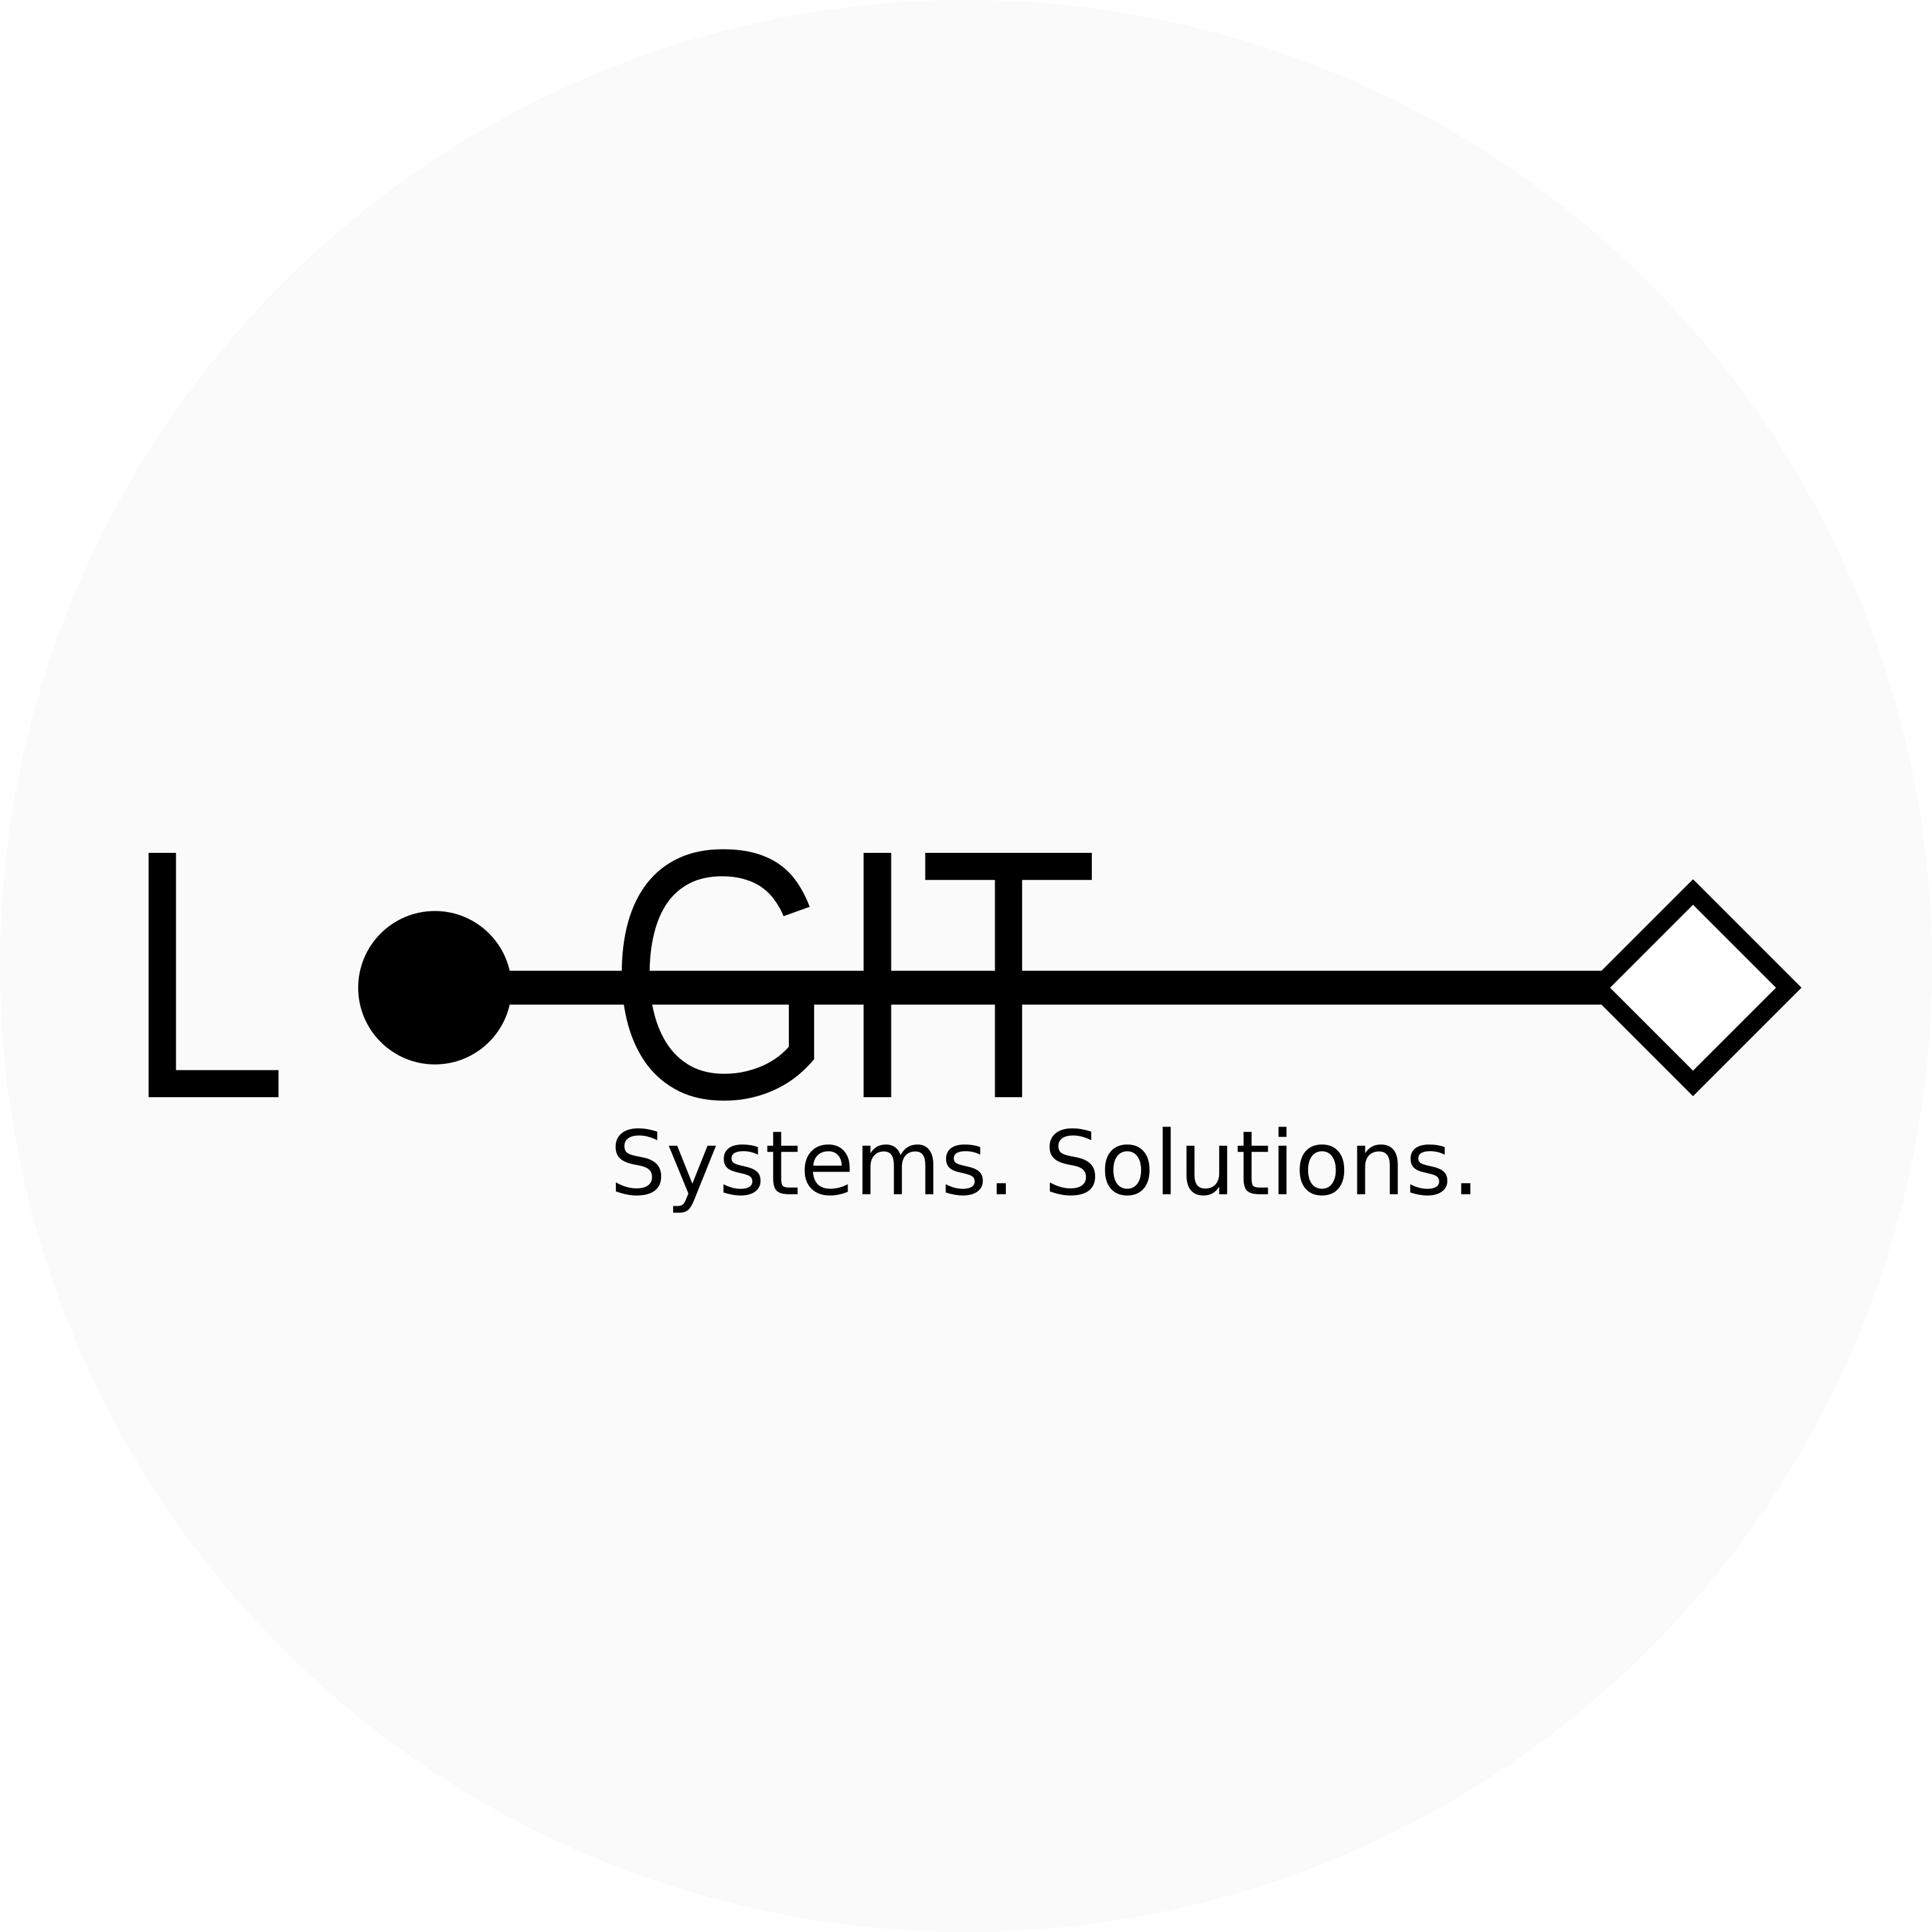 LOGIT Systems. Solutions. Logo